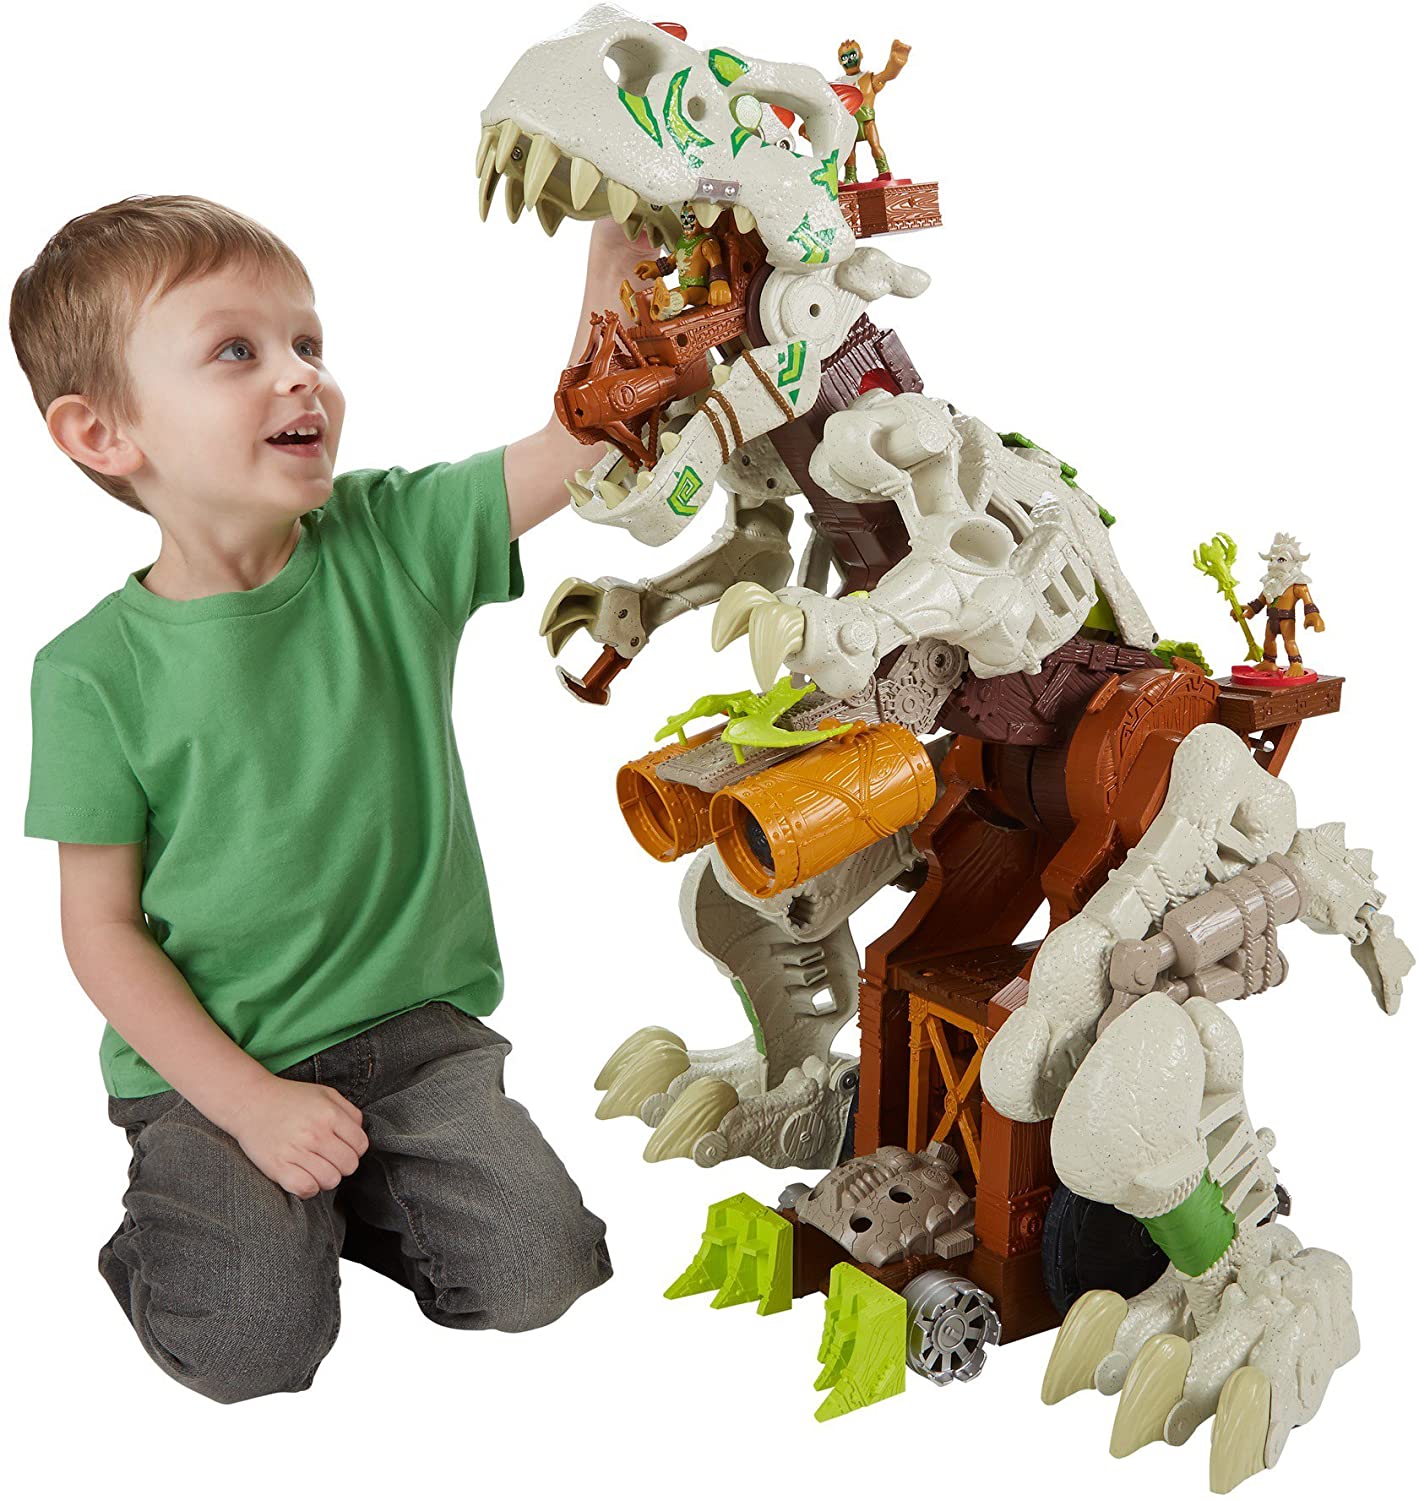 Top 7 Best Robot Dinosaur Toys Reviews in 2023 5